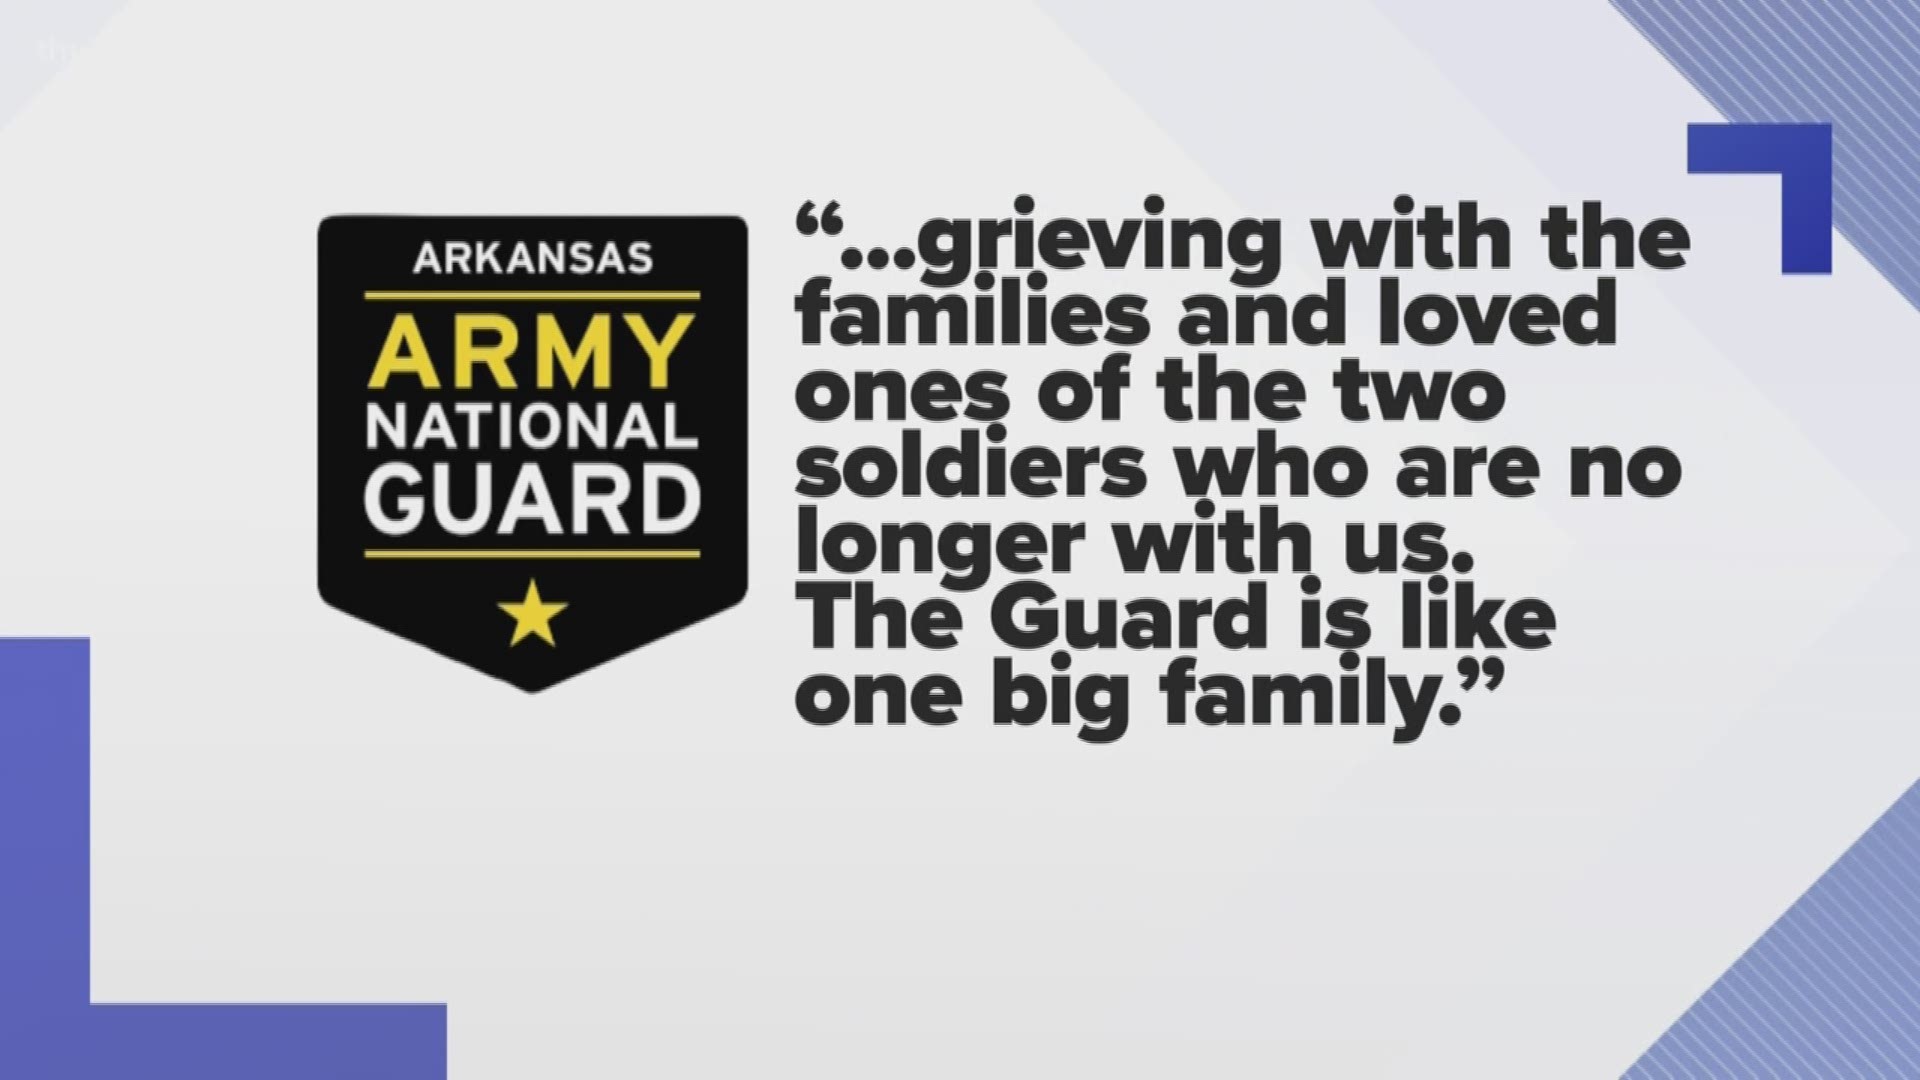 It's been a tragic few days for the Arkansas Army National Guard, as two guardsmen died by suicide this week.